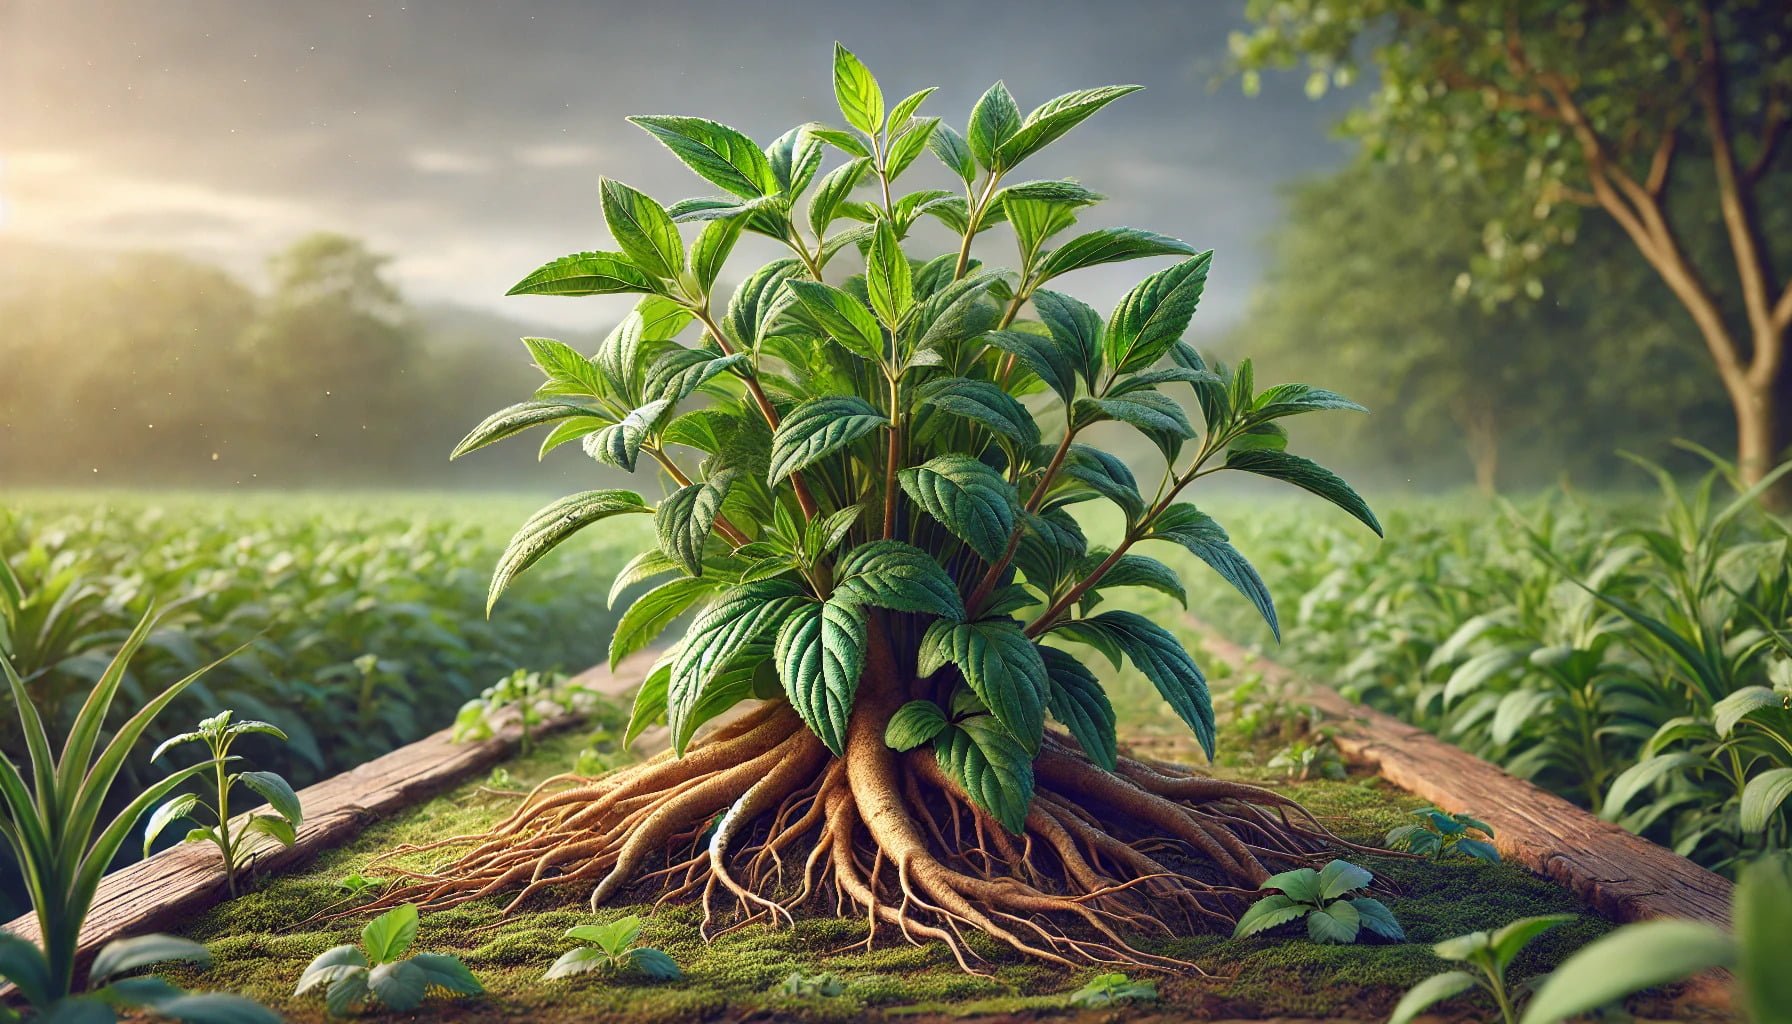 A photorealistic image of ashwagandha plant growing with it's roots on the surface.